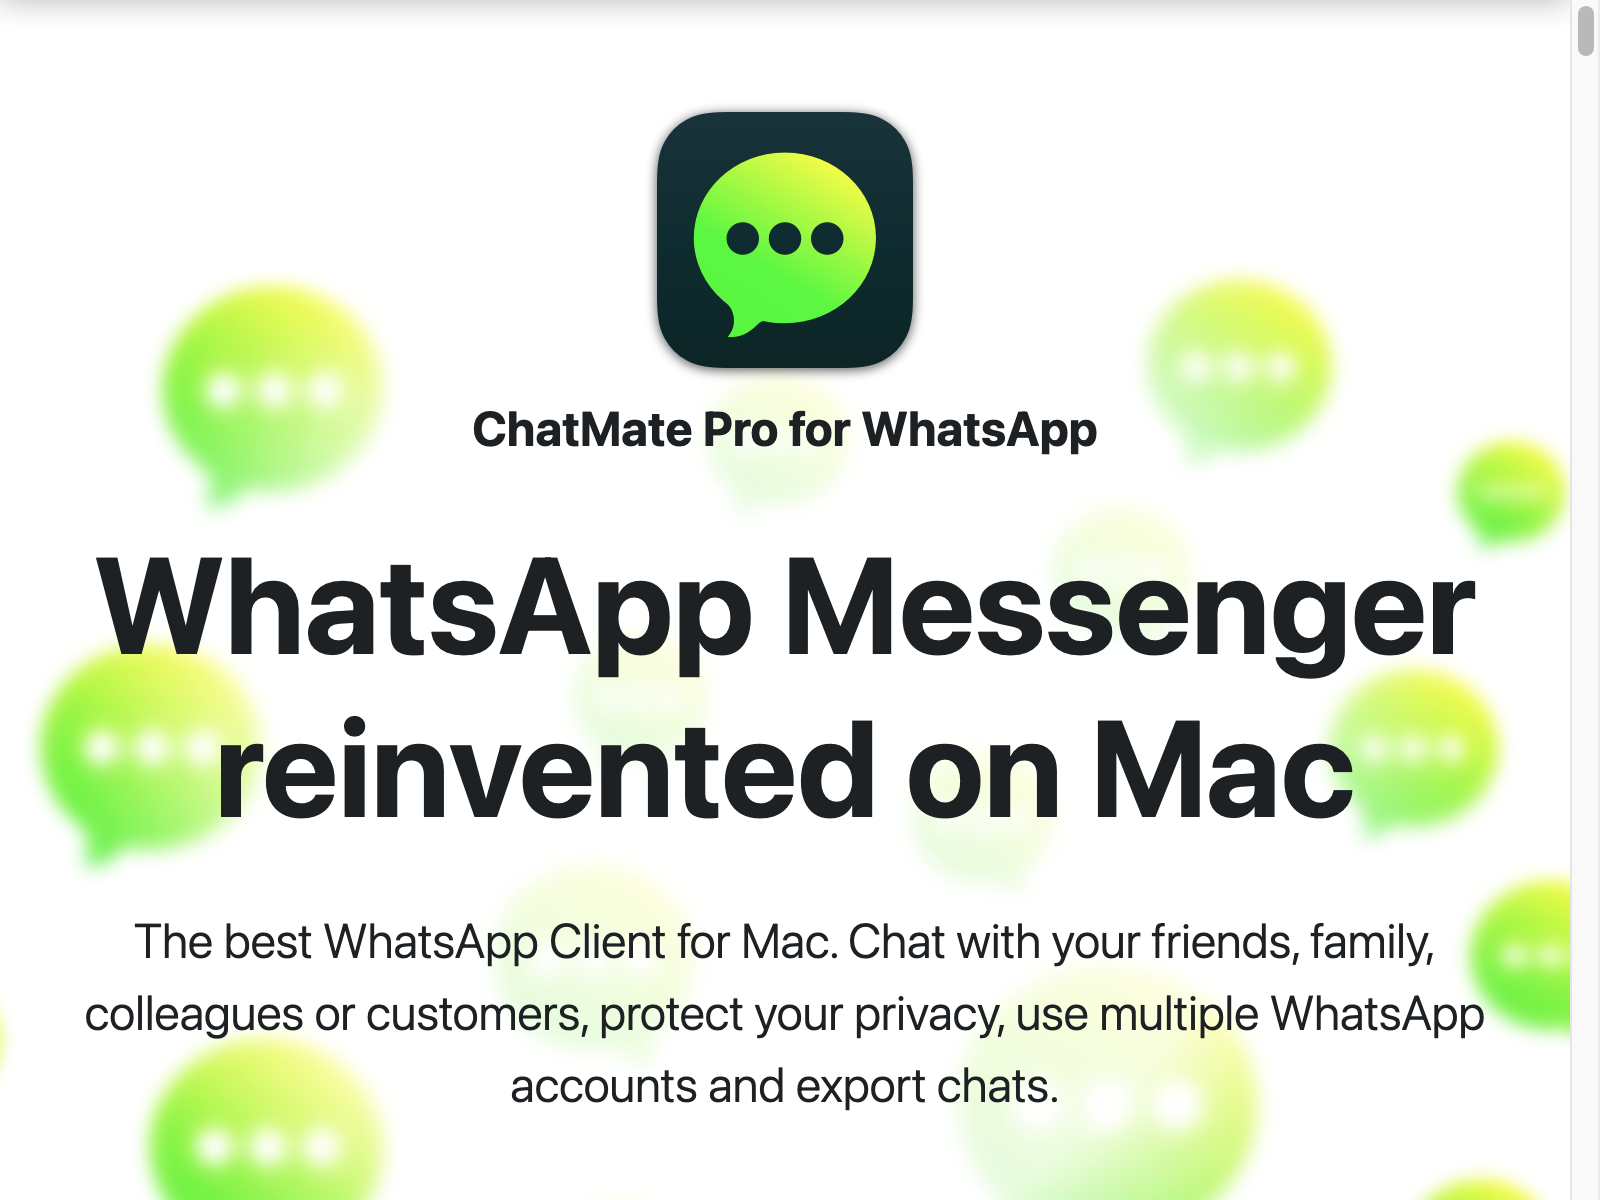 chatmate Review: Pros, Cons, Alternatives